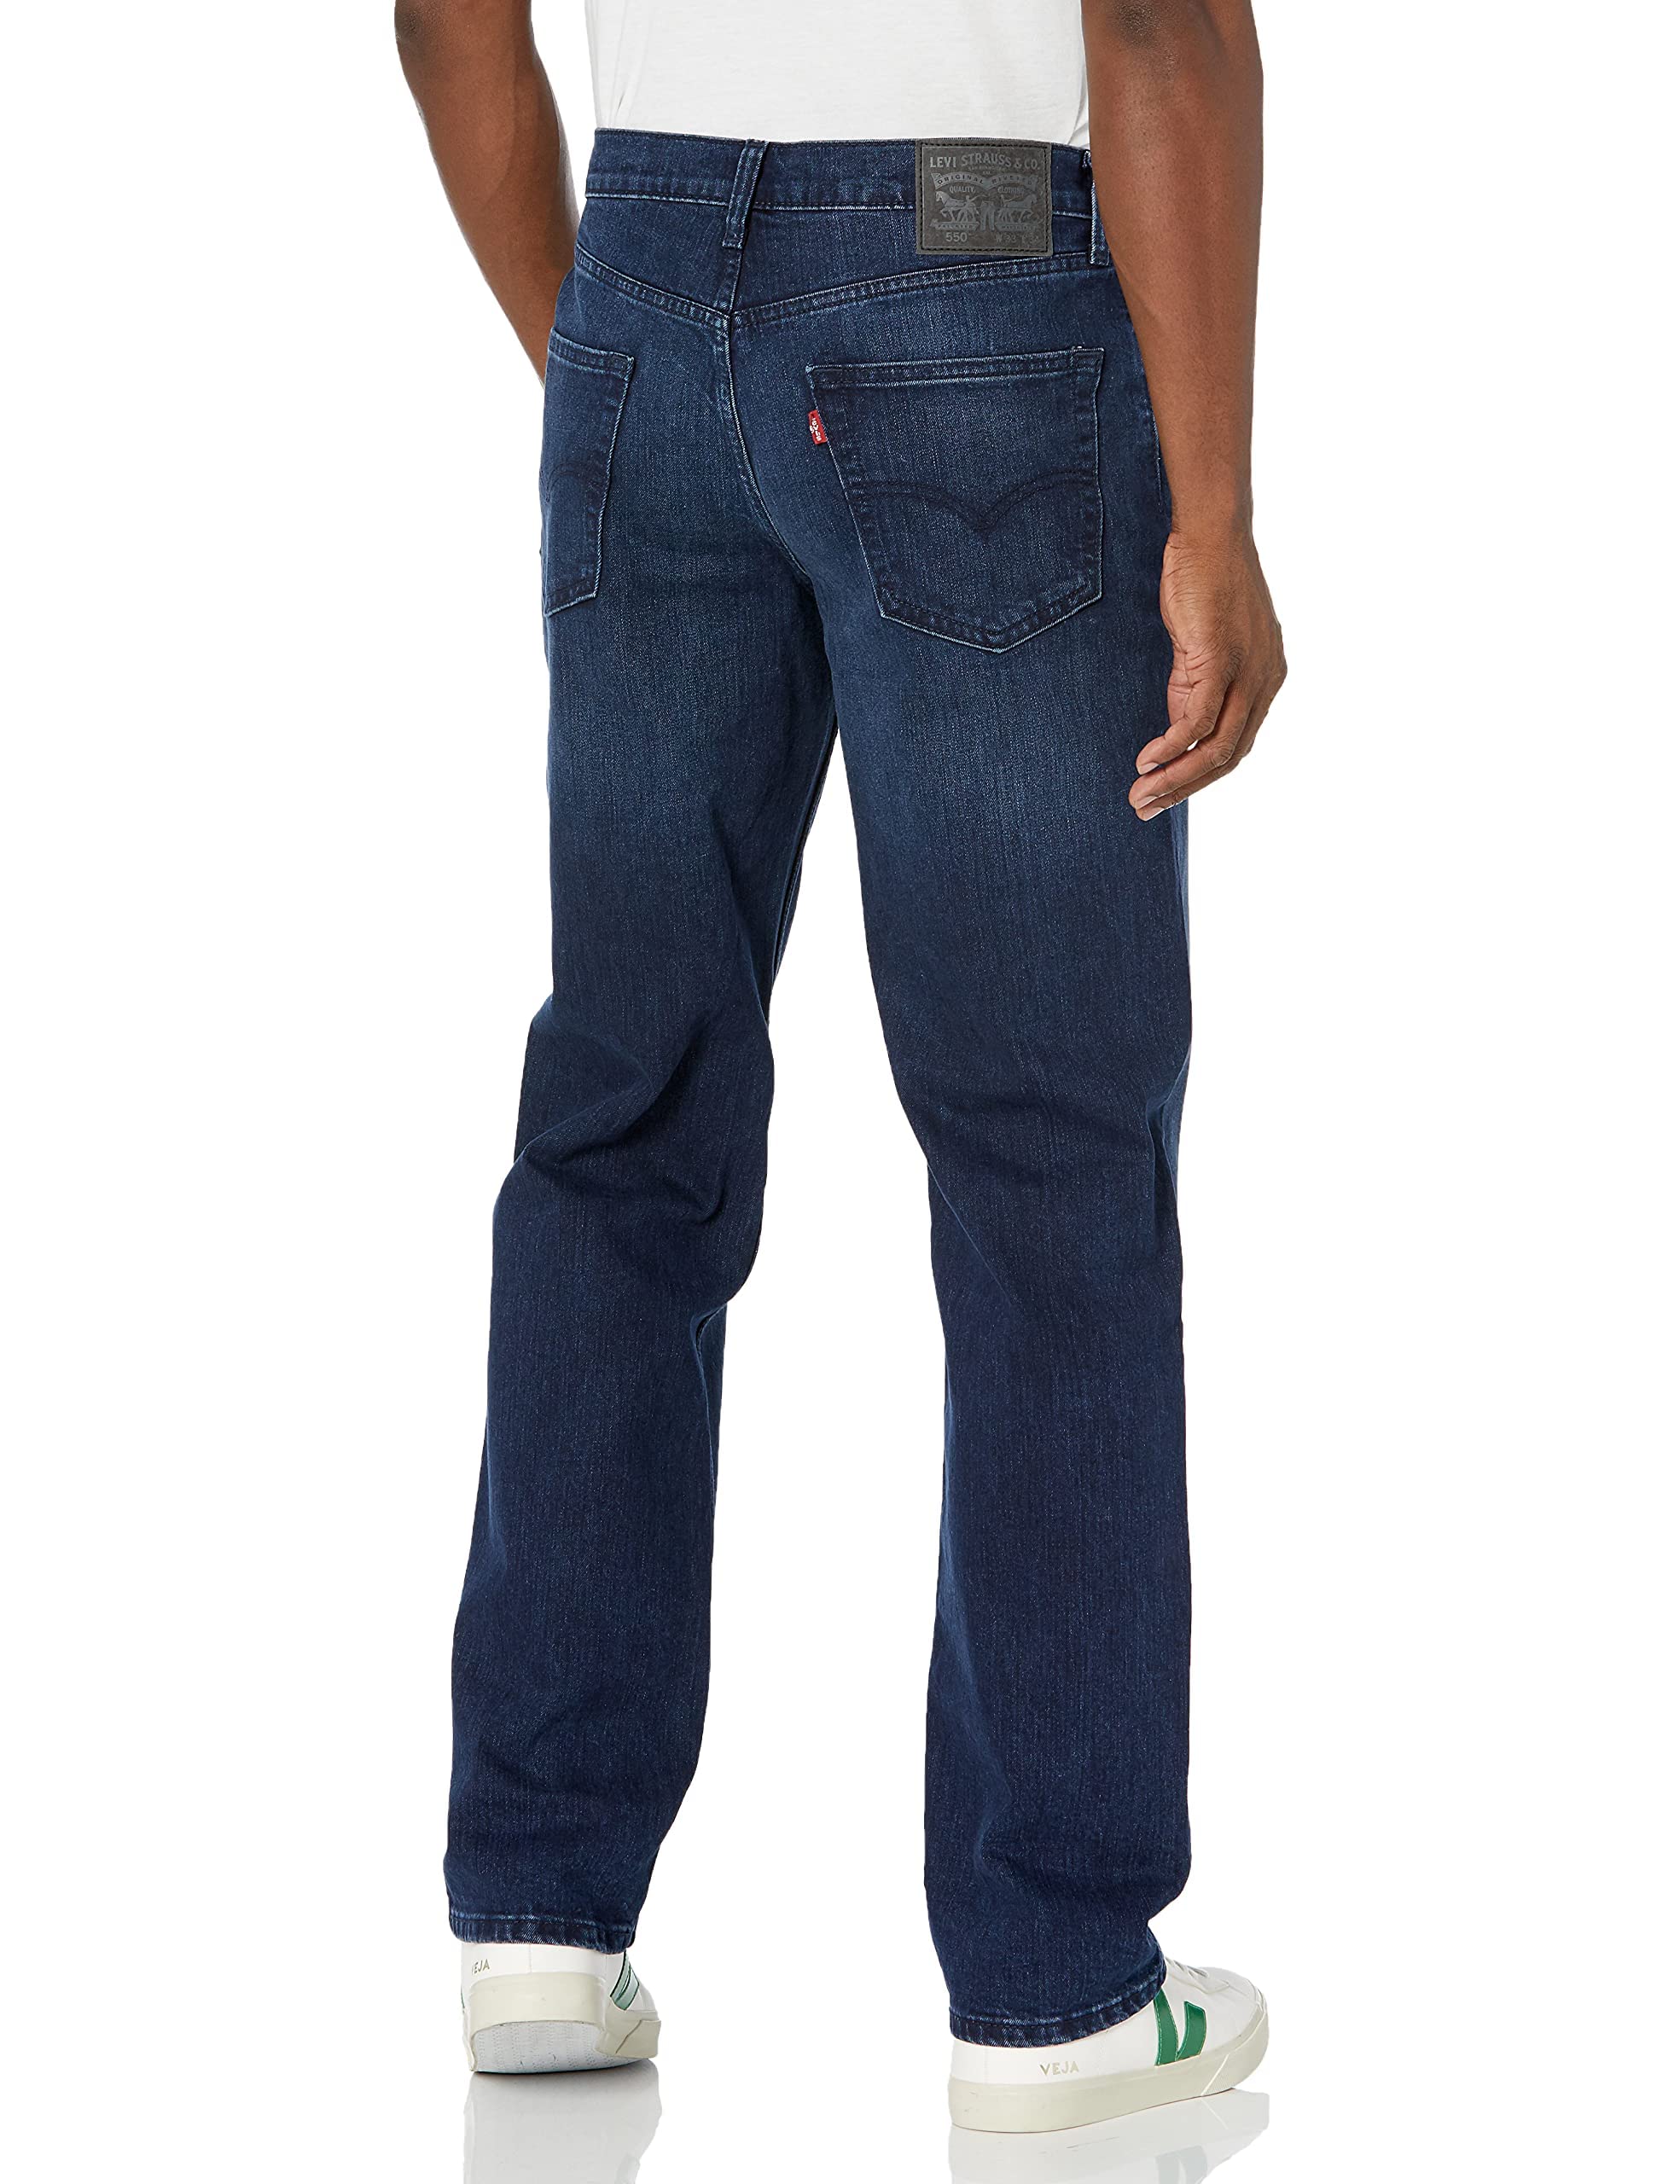 Levi's Men's 550 Relaxed Fit Jeans (Also Available in Big & Tall), The Twist-Stretch, 40W x 30L